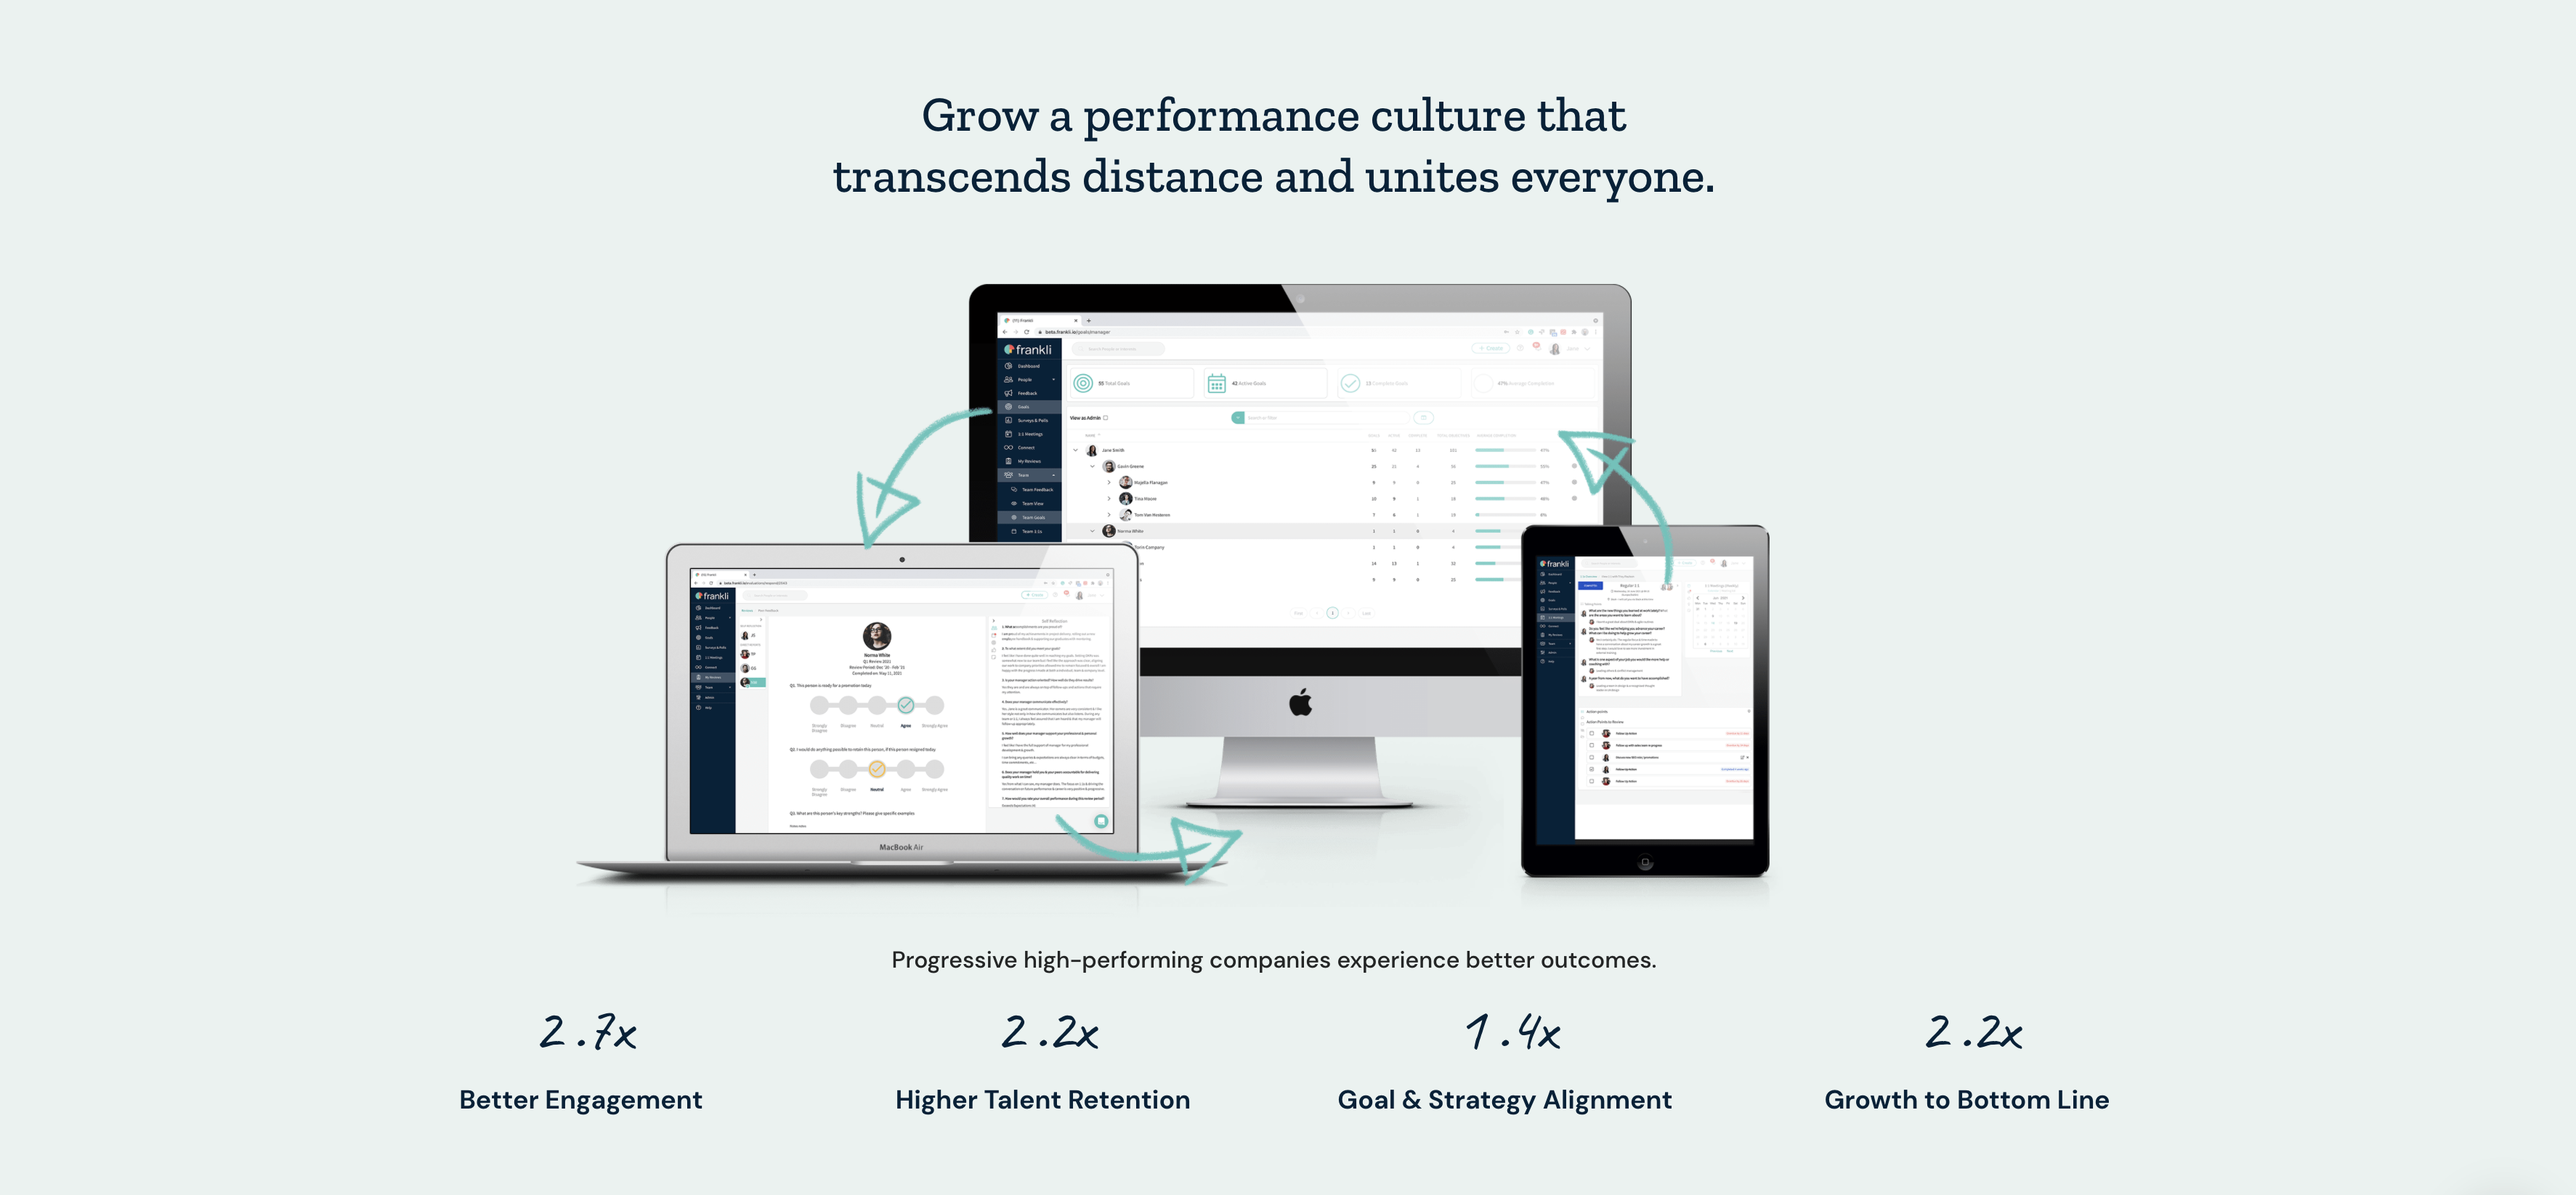 Grow a performance culture that transcends distance and unites everyone.